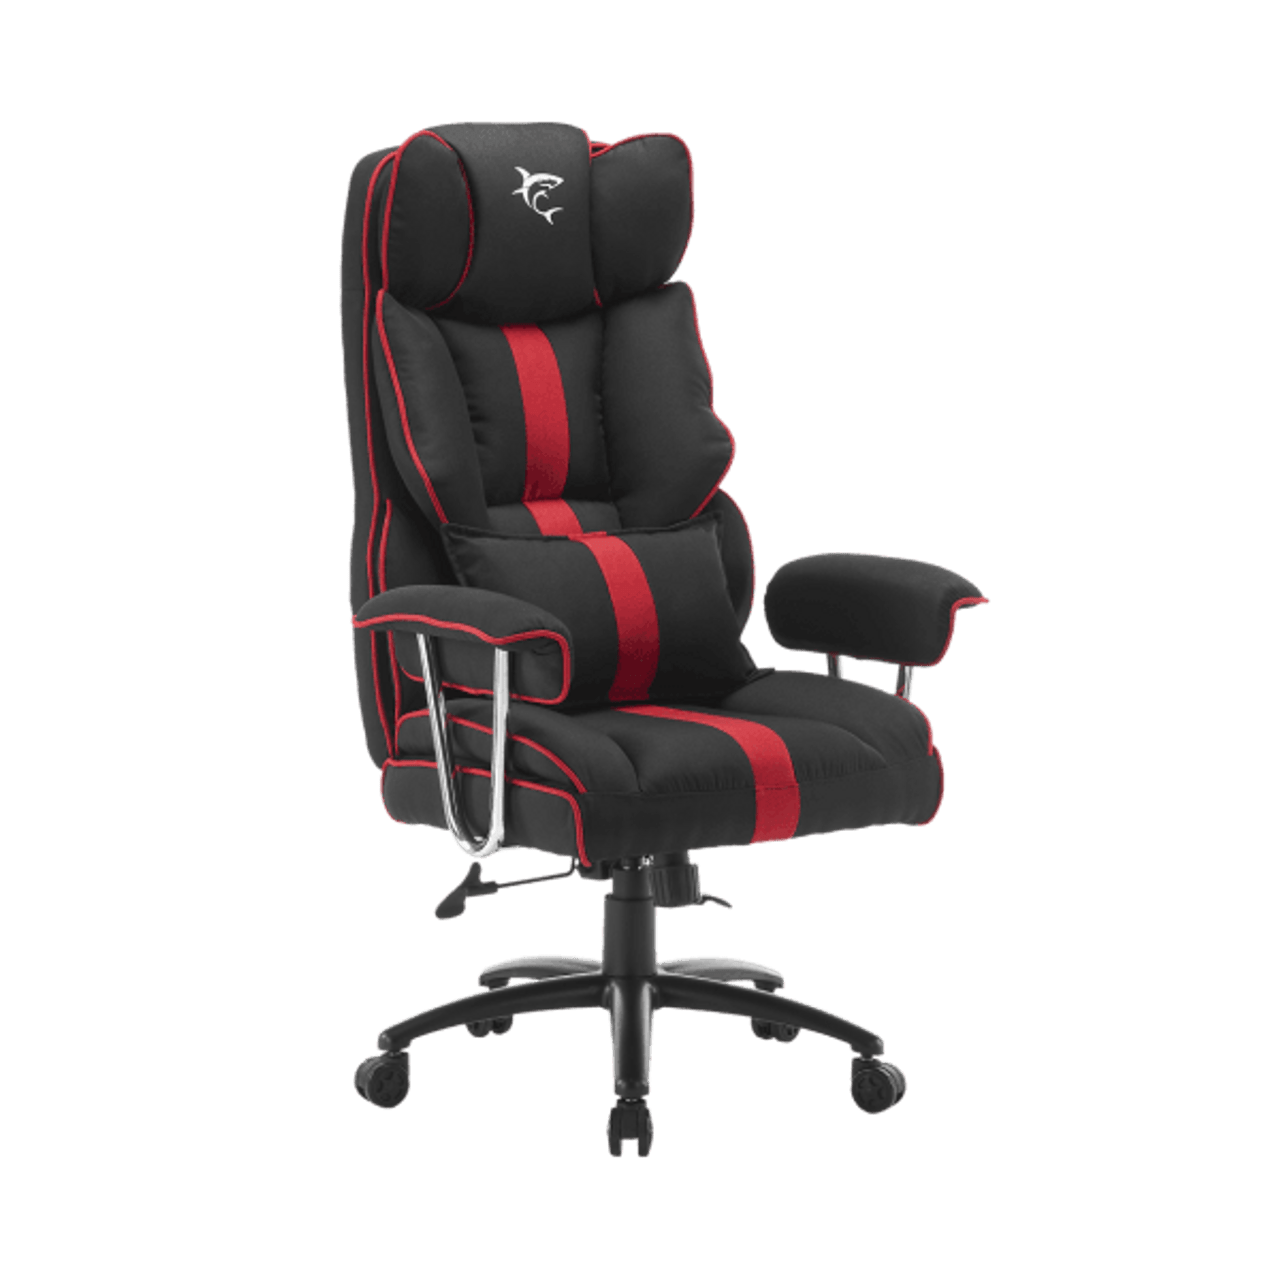 White Shark GAMING CHAIR LE MANS Black/red